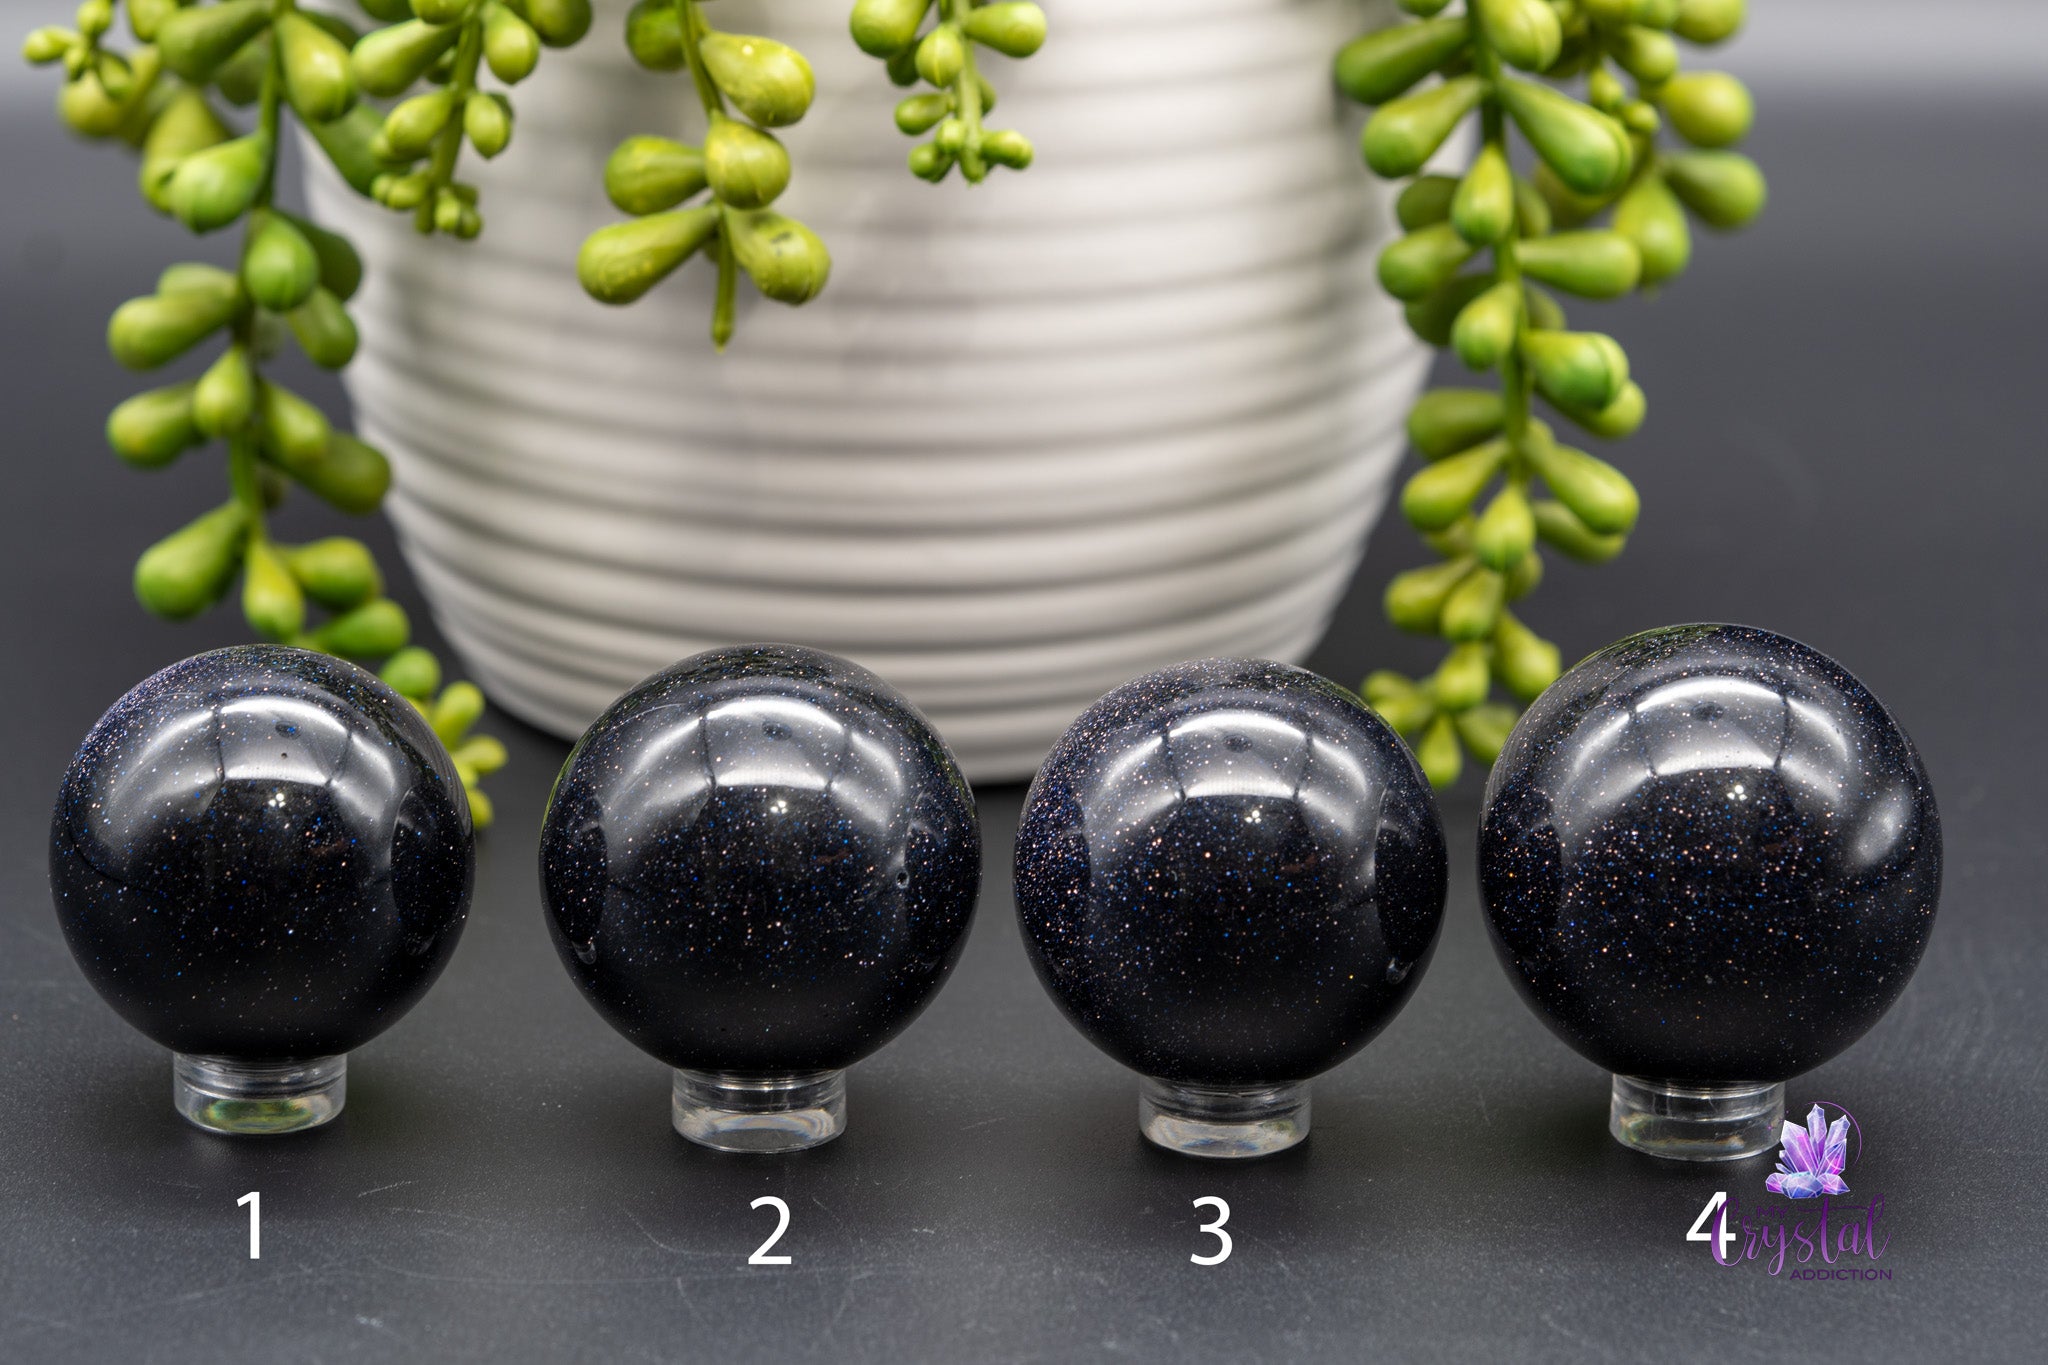 Blue Standstone / Blue Goldstone Sphere - 1.5"-2.1"/39mm-54mm - My Crystal Addiction